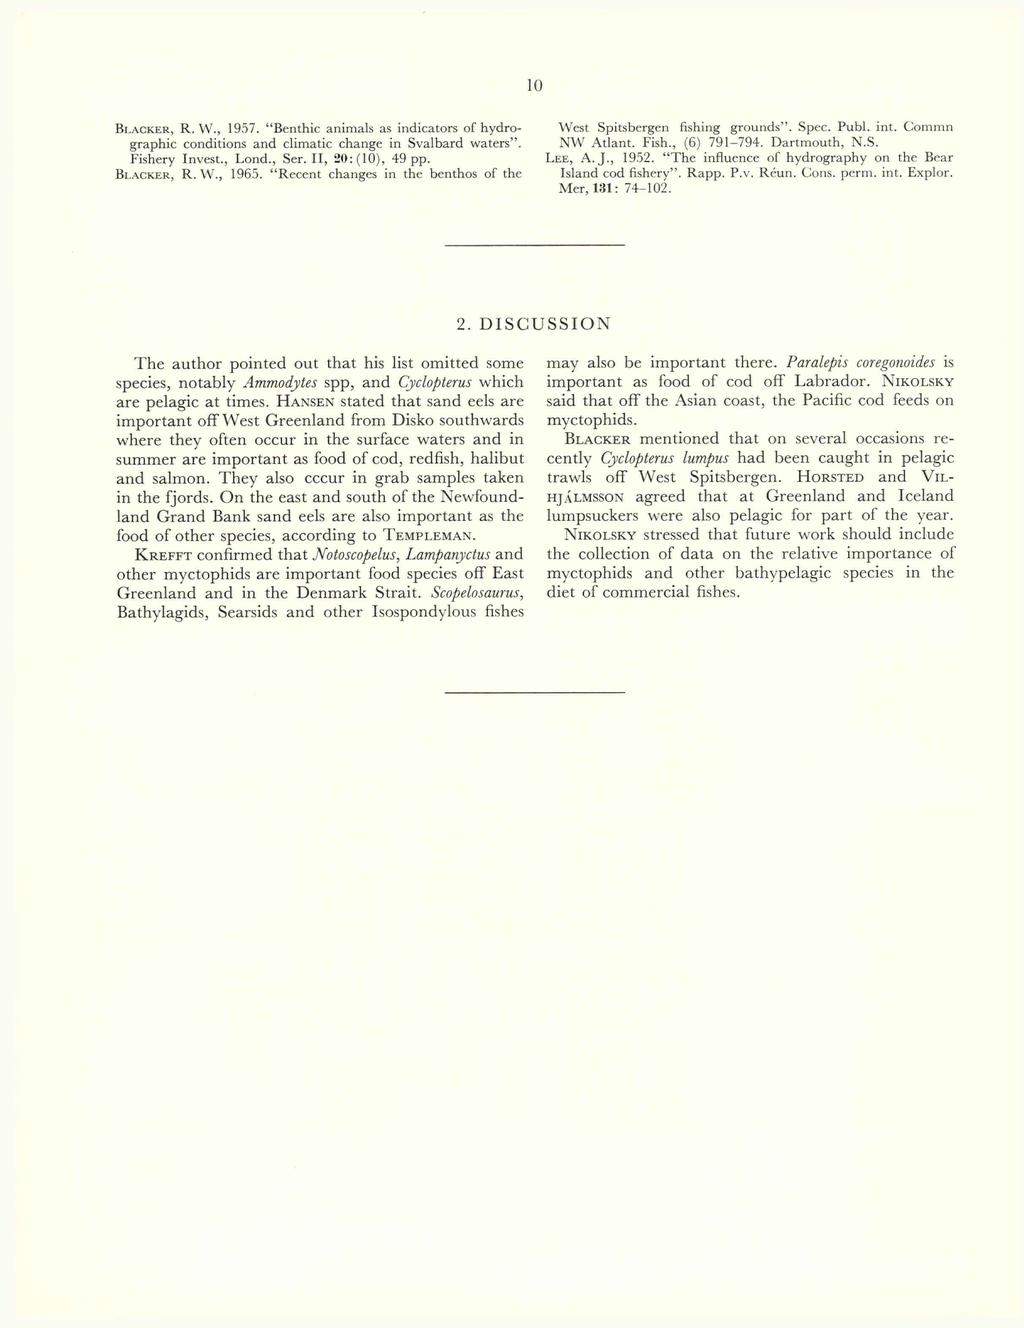 10 B l a c k e r, R. W., 1957. Benthic animals as indicators of hydrographic conditions and climatic change in Svalbard waters. Fishery Invest., Lond., Ser. II, 20: (10), 49 pp. B l a c k e r, R. W., 1965.